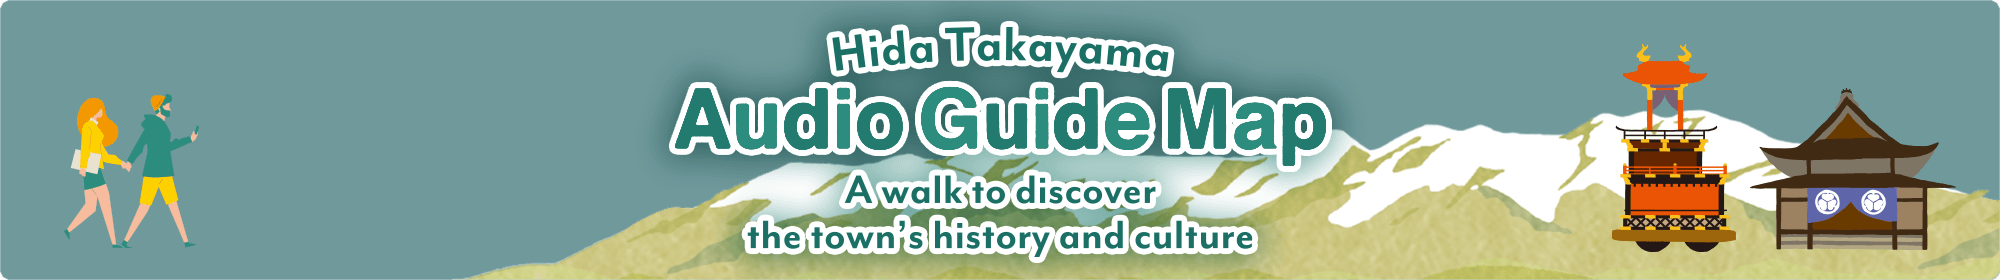 Hida Takayama Audio Guide - A walk to discover the town’s history and culture